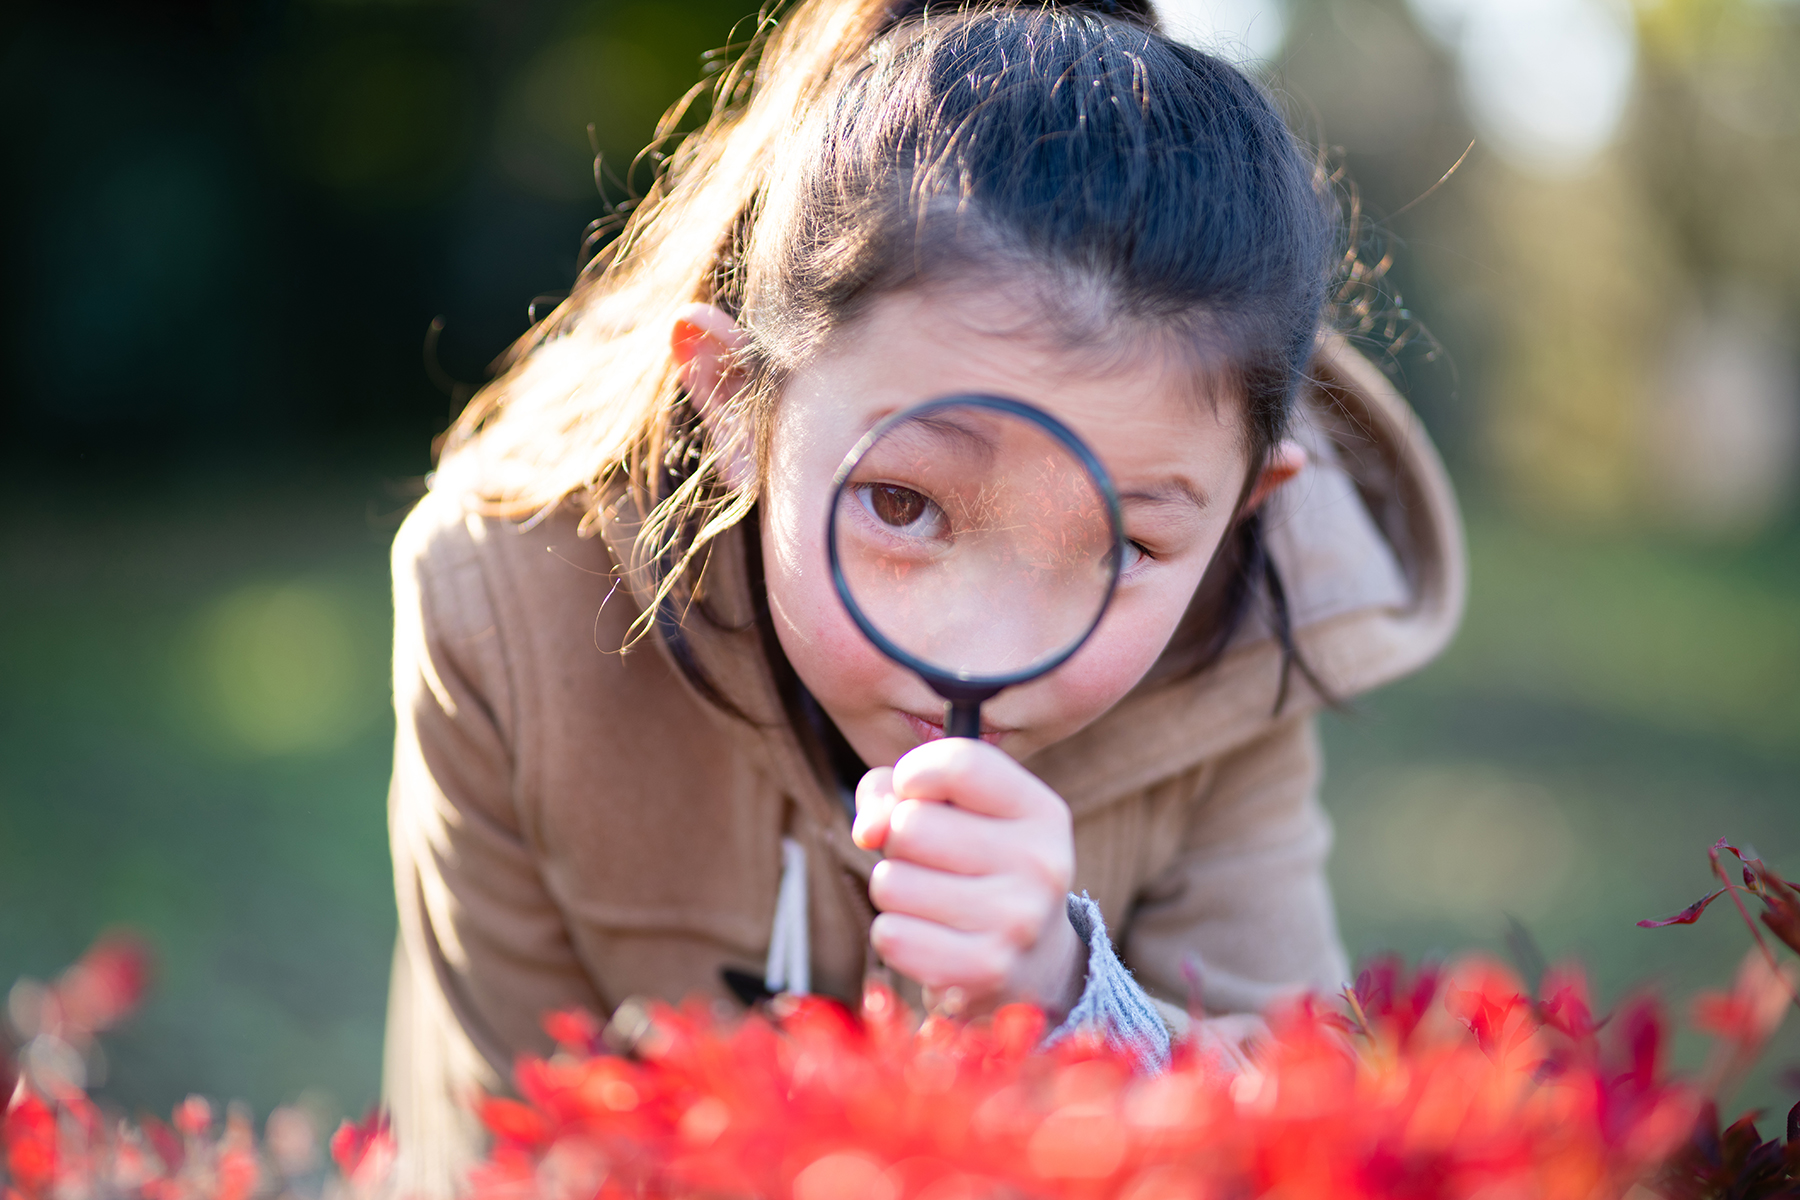 A photo of a young girl investigating and looking through a magnifying glass outside